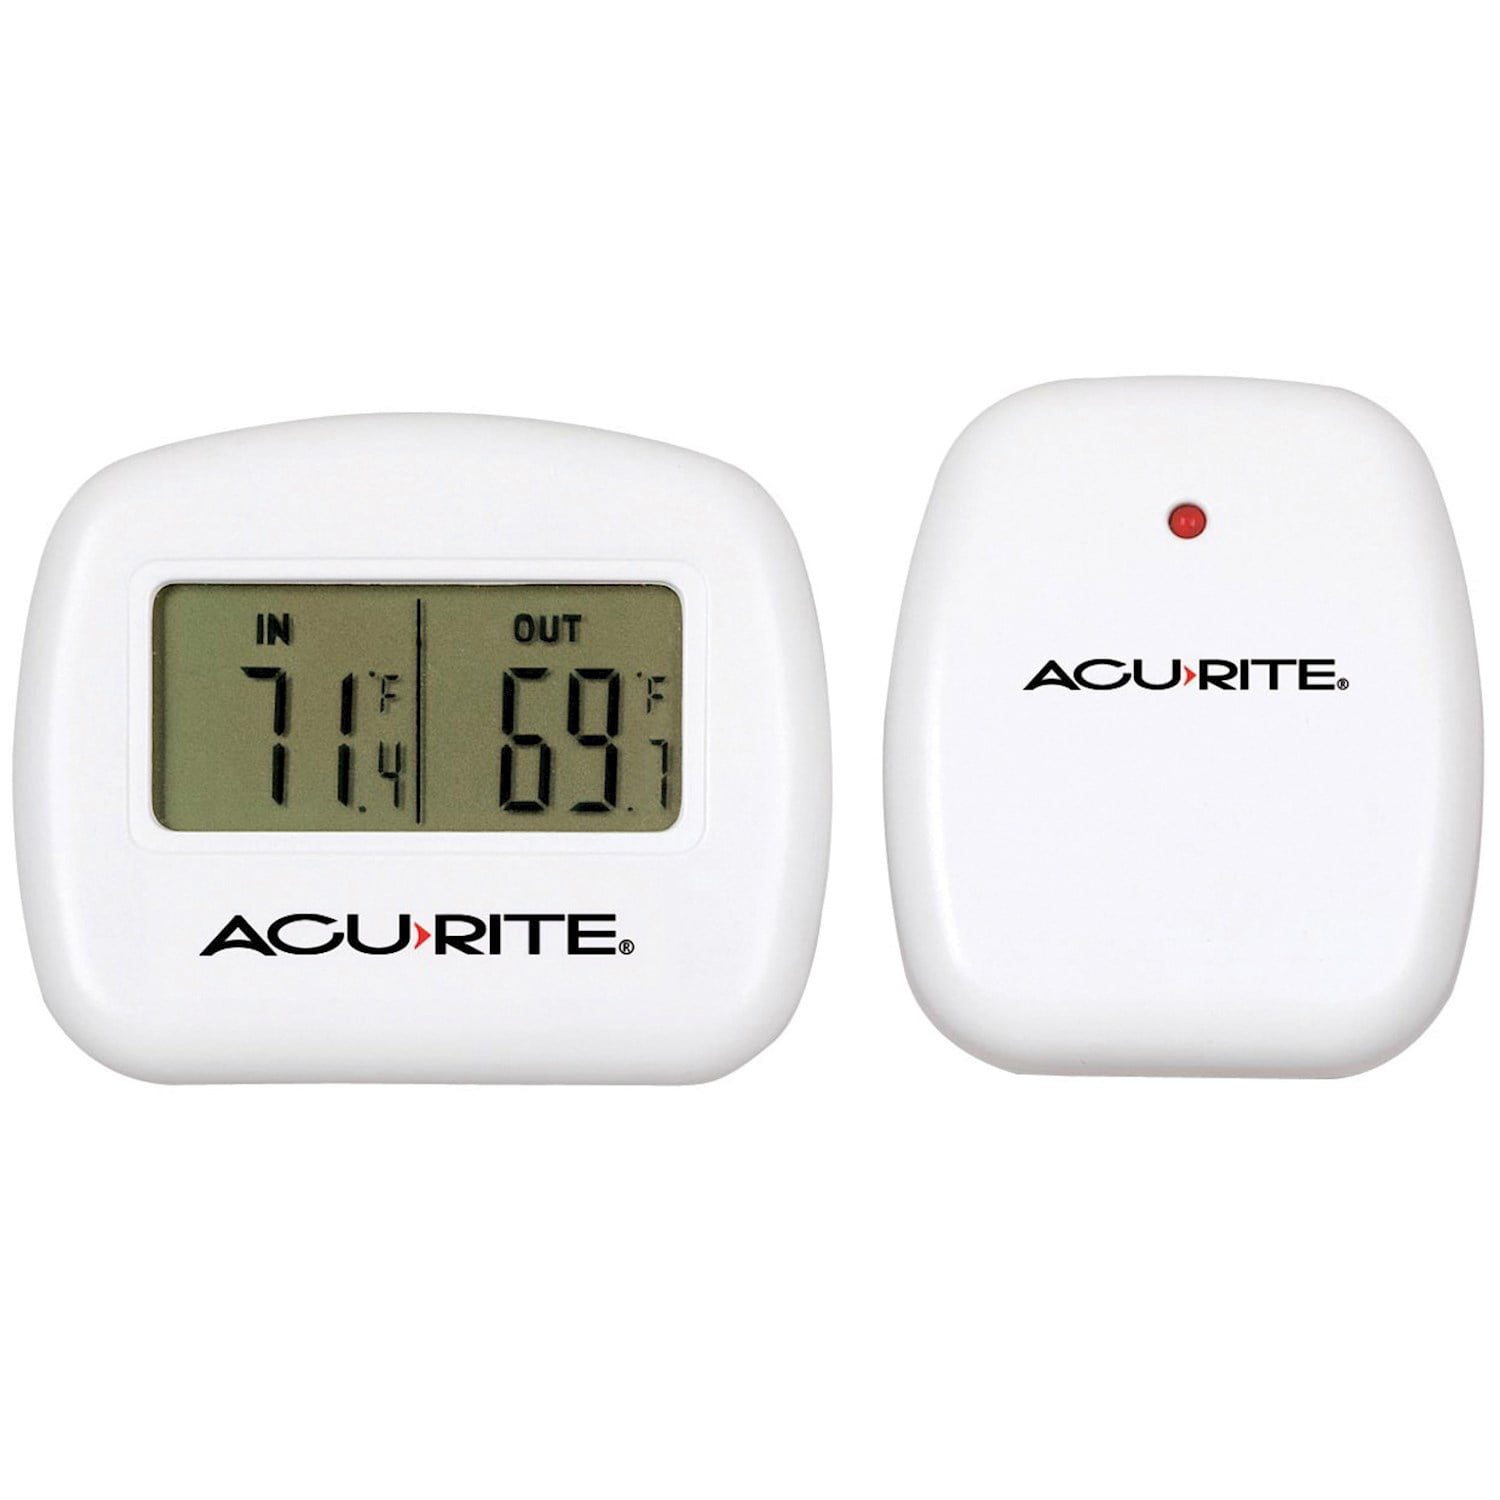 Acurite Digital Thermometer Self-Setting Clock Indoor Outdoor Wireless